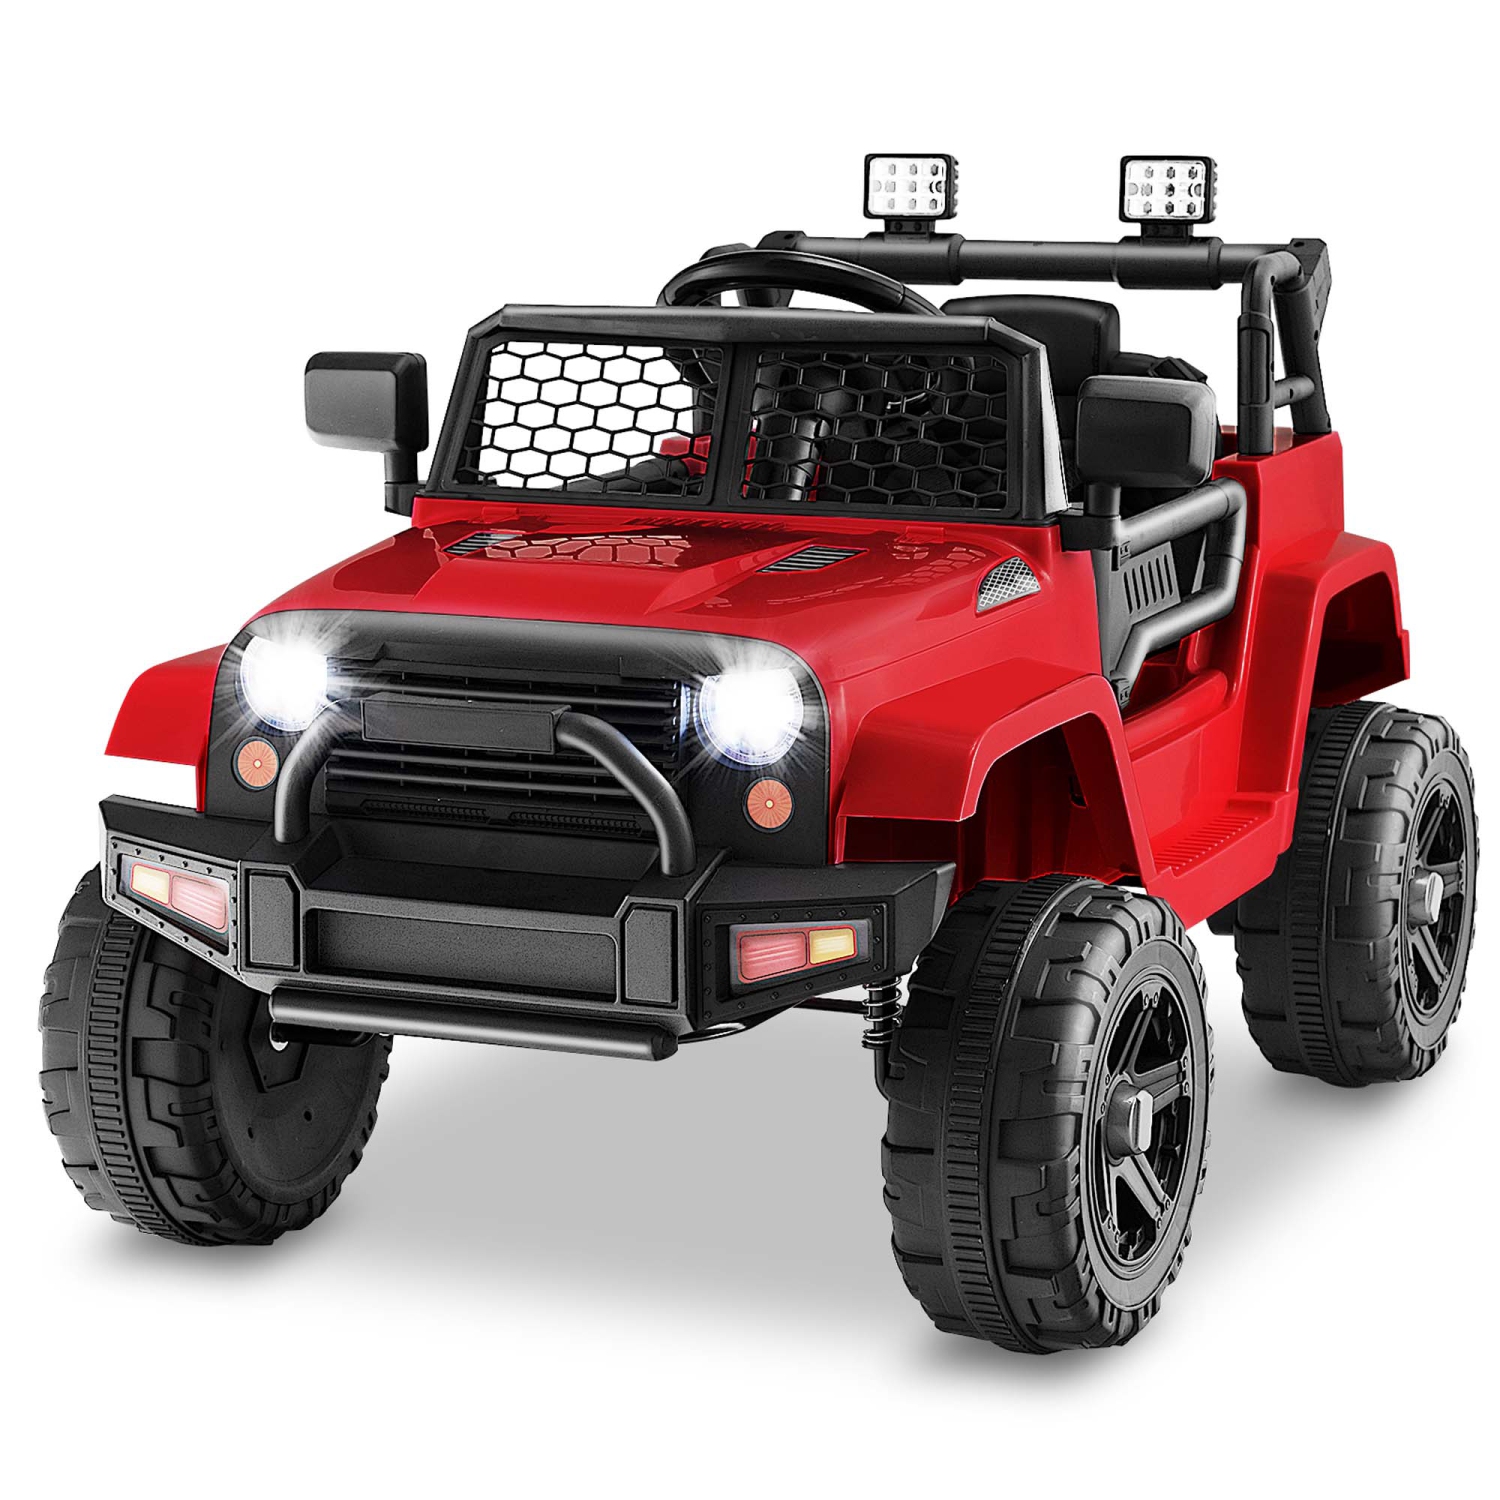 Costway 12V Battery Powered Ride On Truck Electric Kids Ride On Car with Remote Control 4-Wheel Vehicle Toy for Boys & Girls